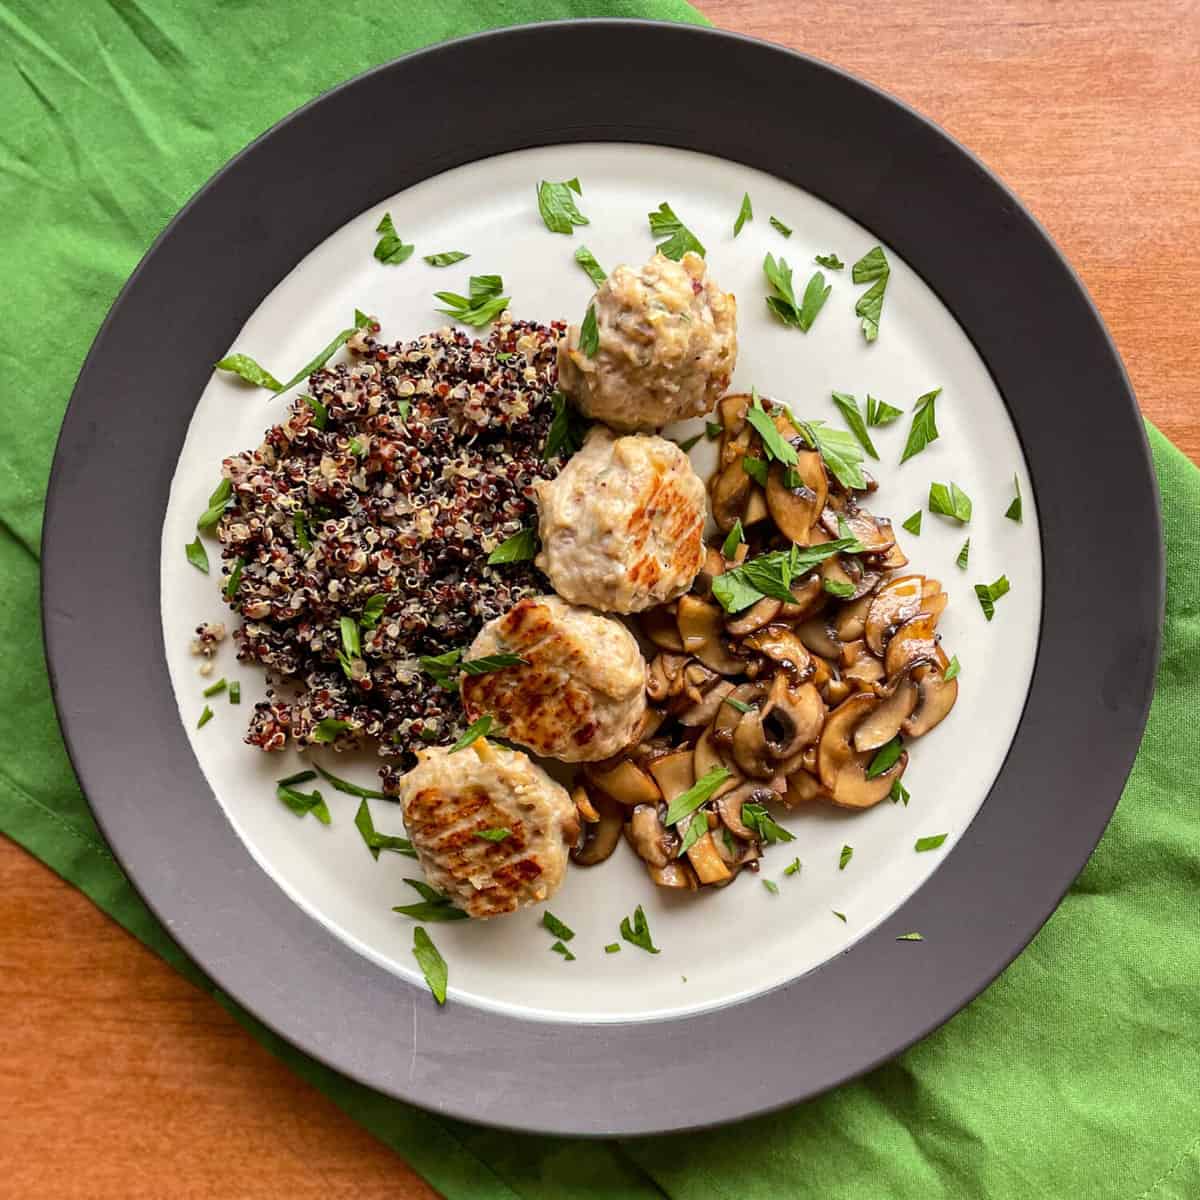 a plate of chicken and apple meatbals with quinoa, cooked mushrooms, and chopped parsley.